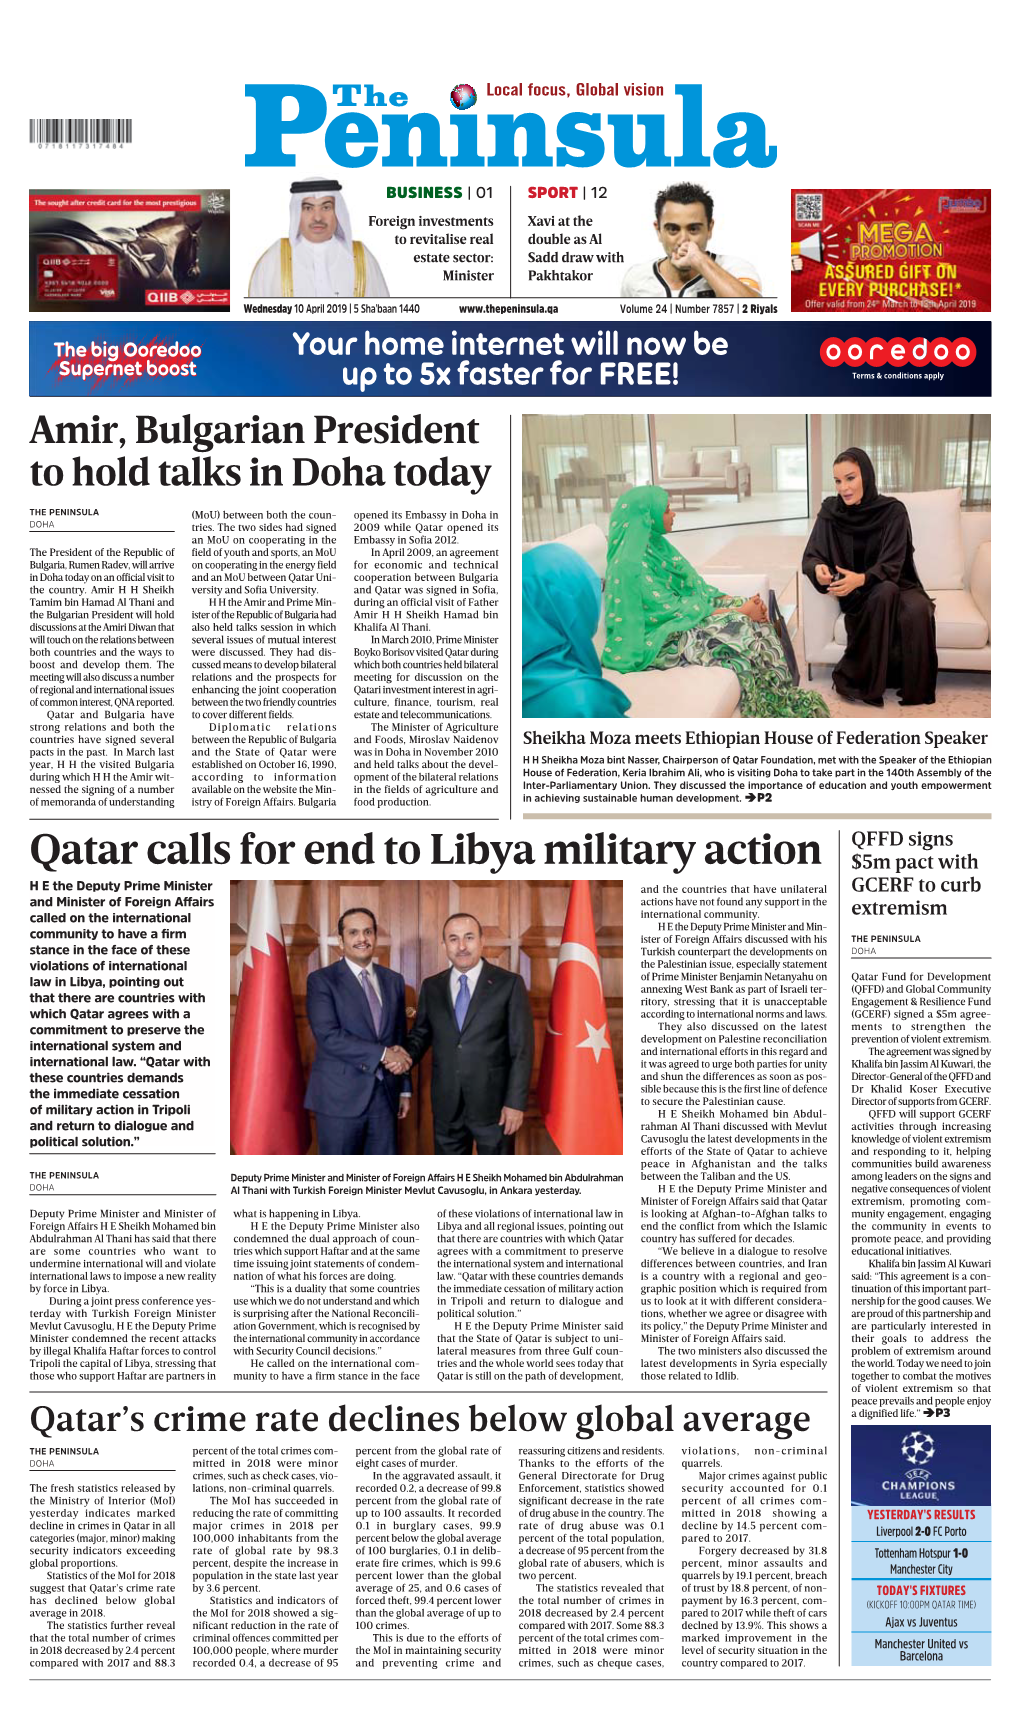 Qatar Calls for End to Libya Military Action